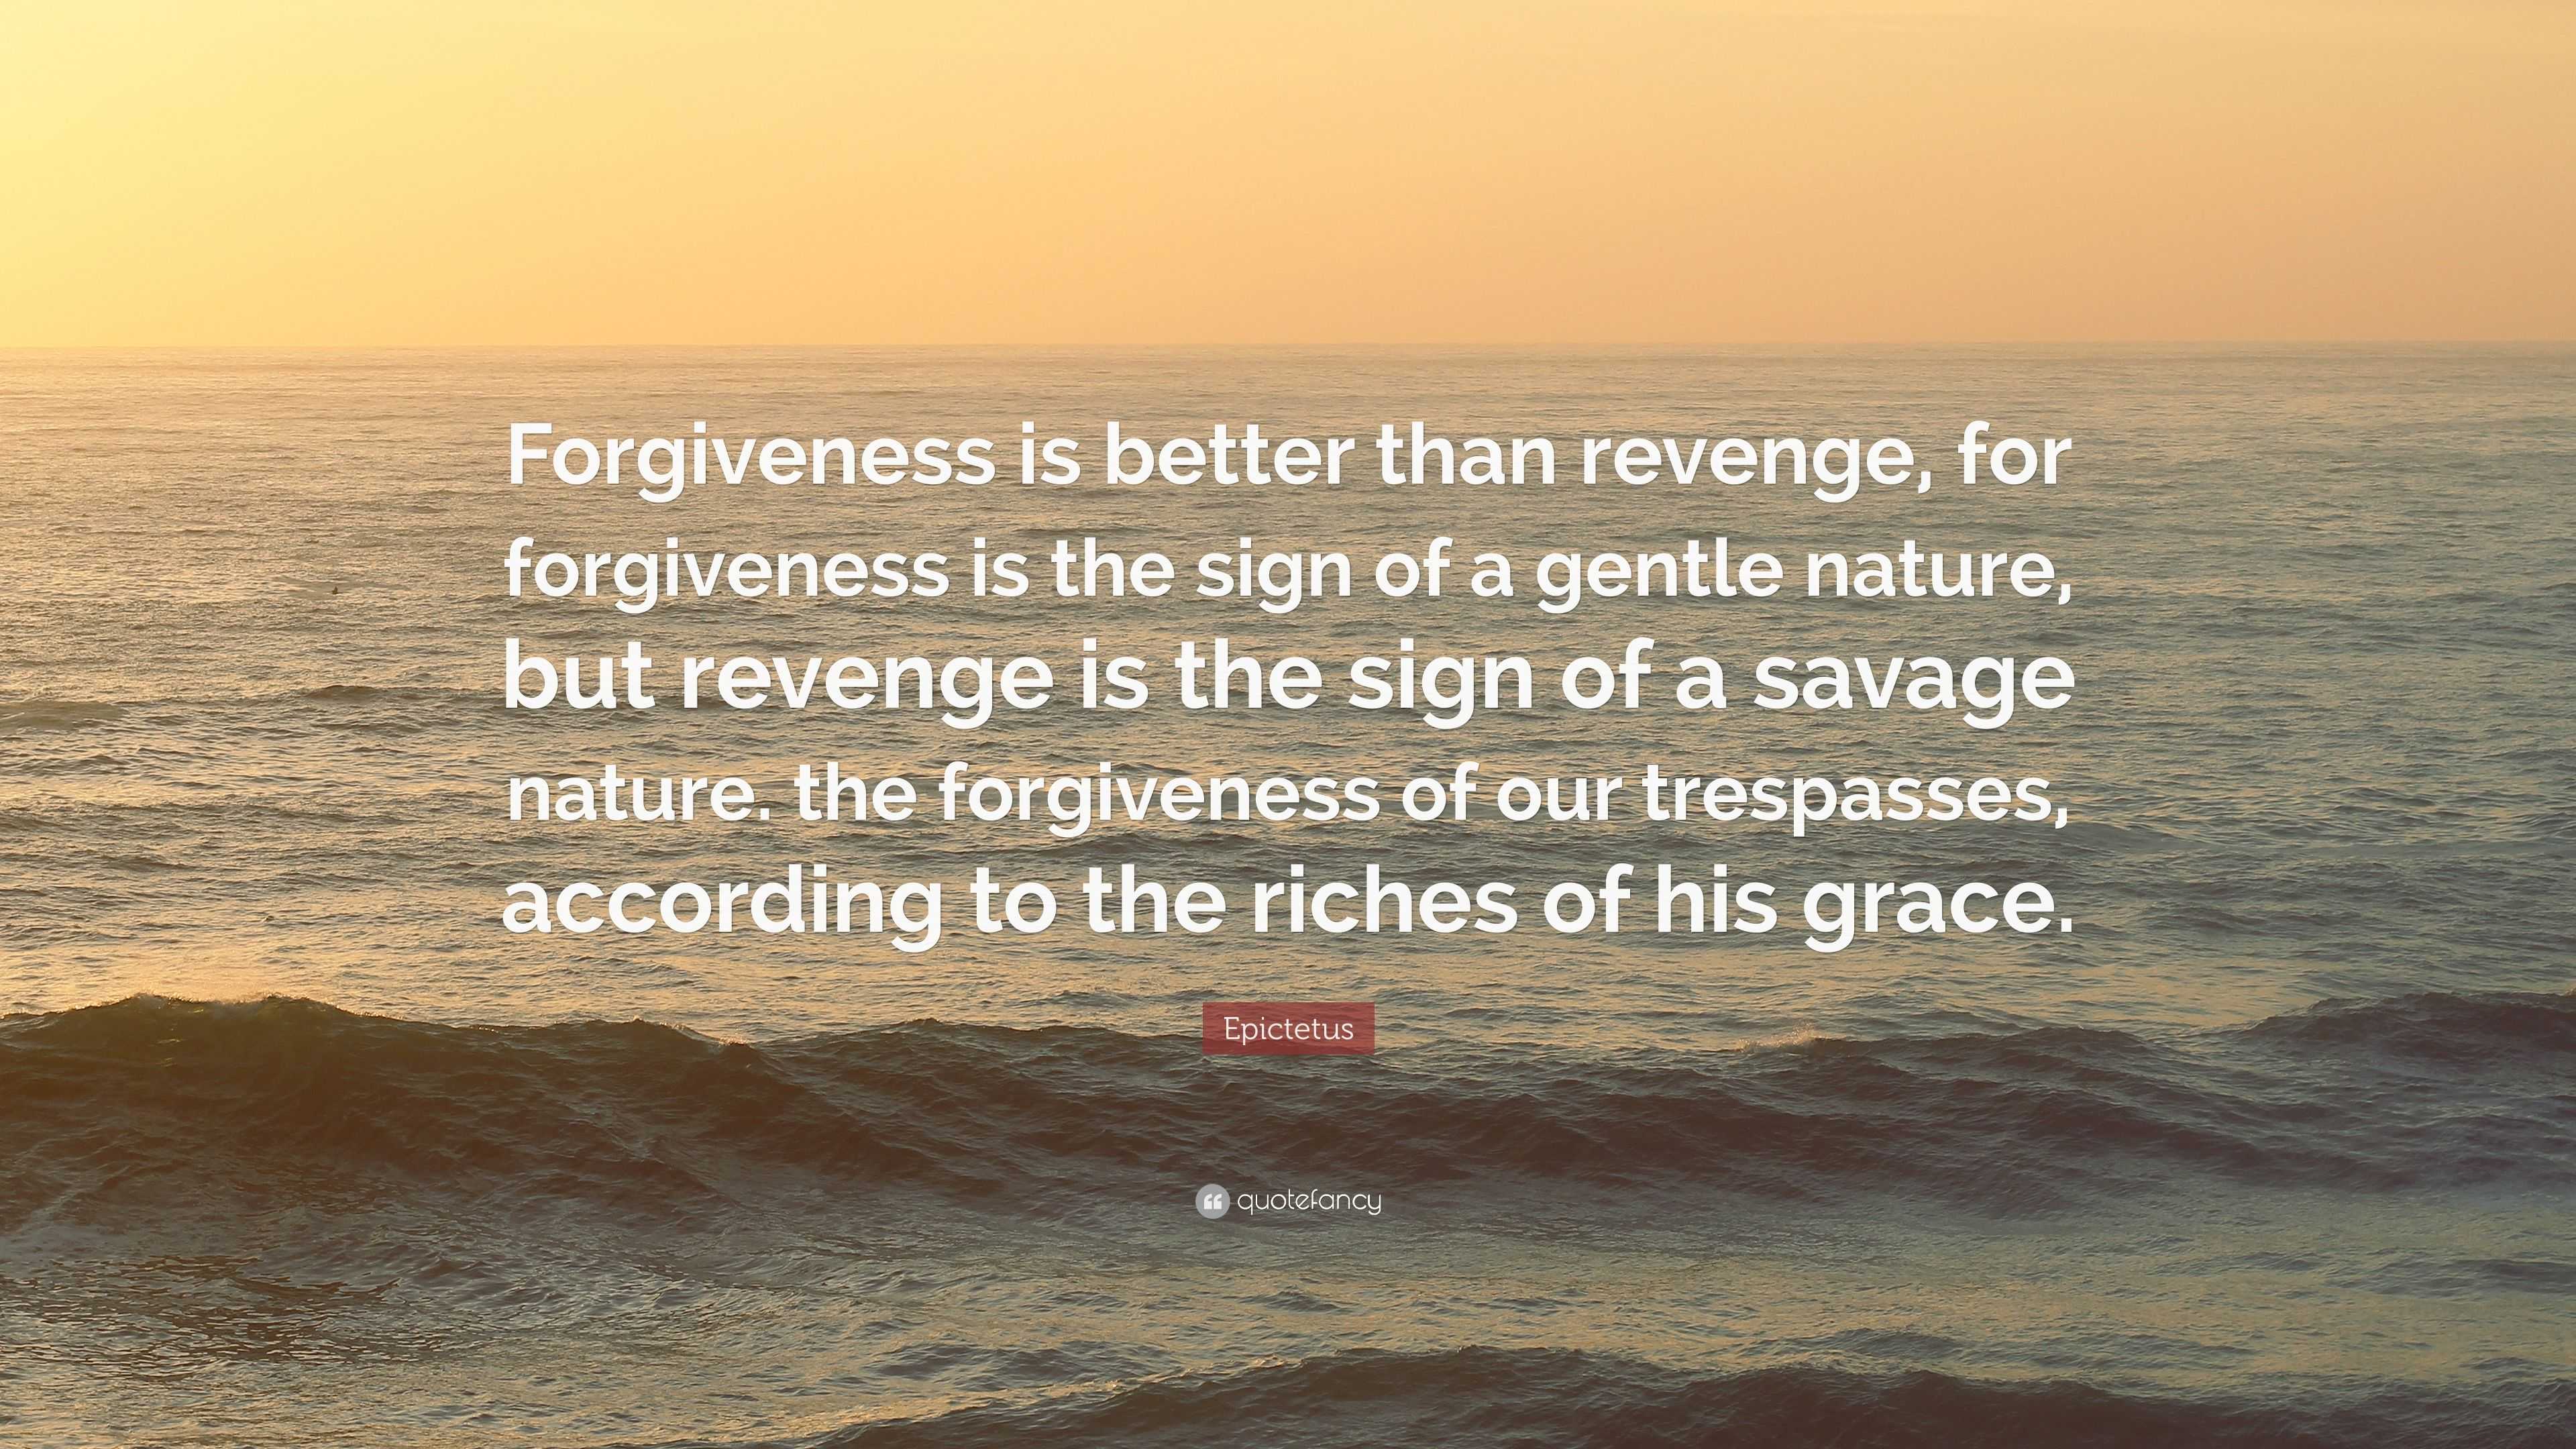 There is no vengeance other than forgiveness Venge, Nojoto